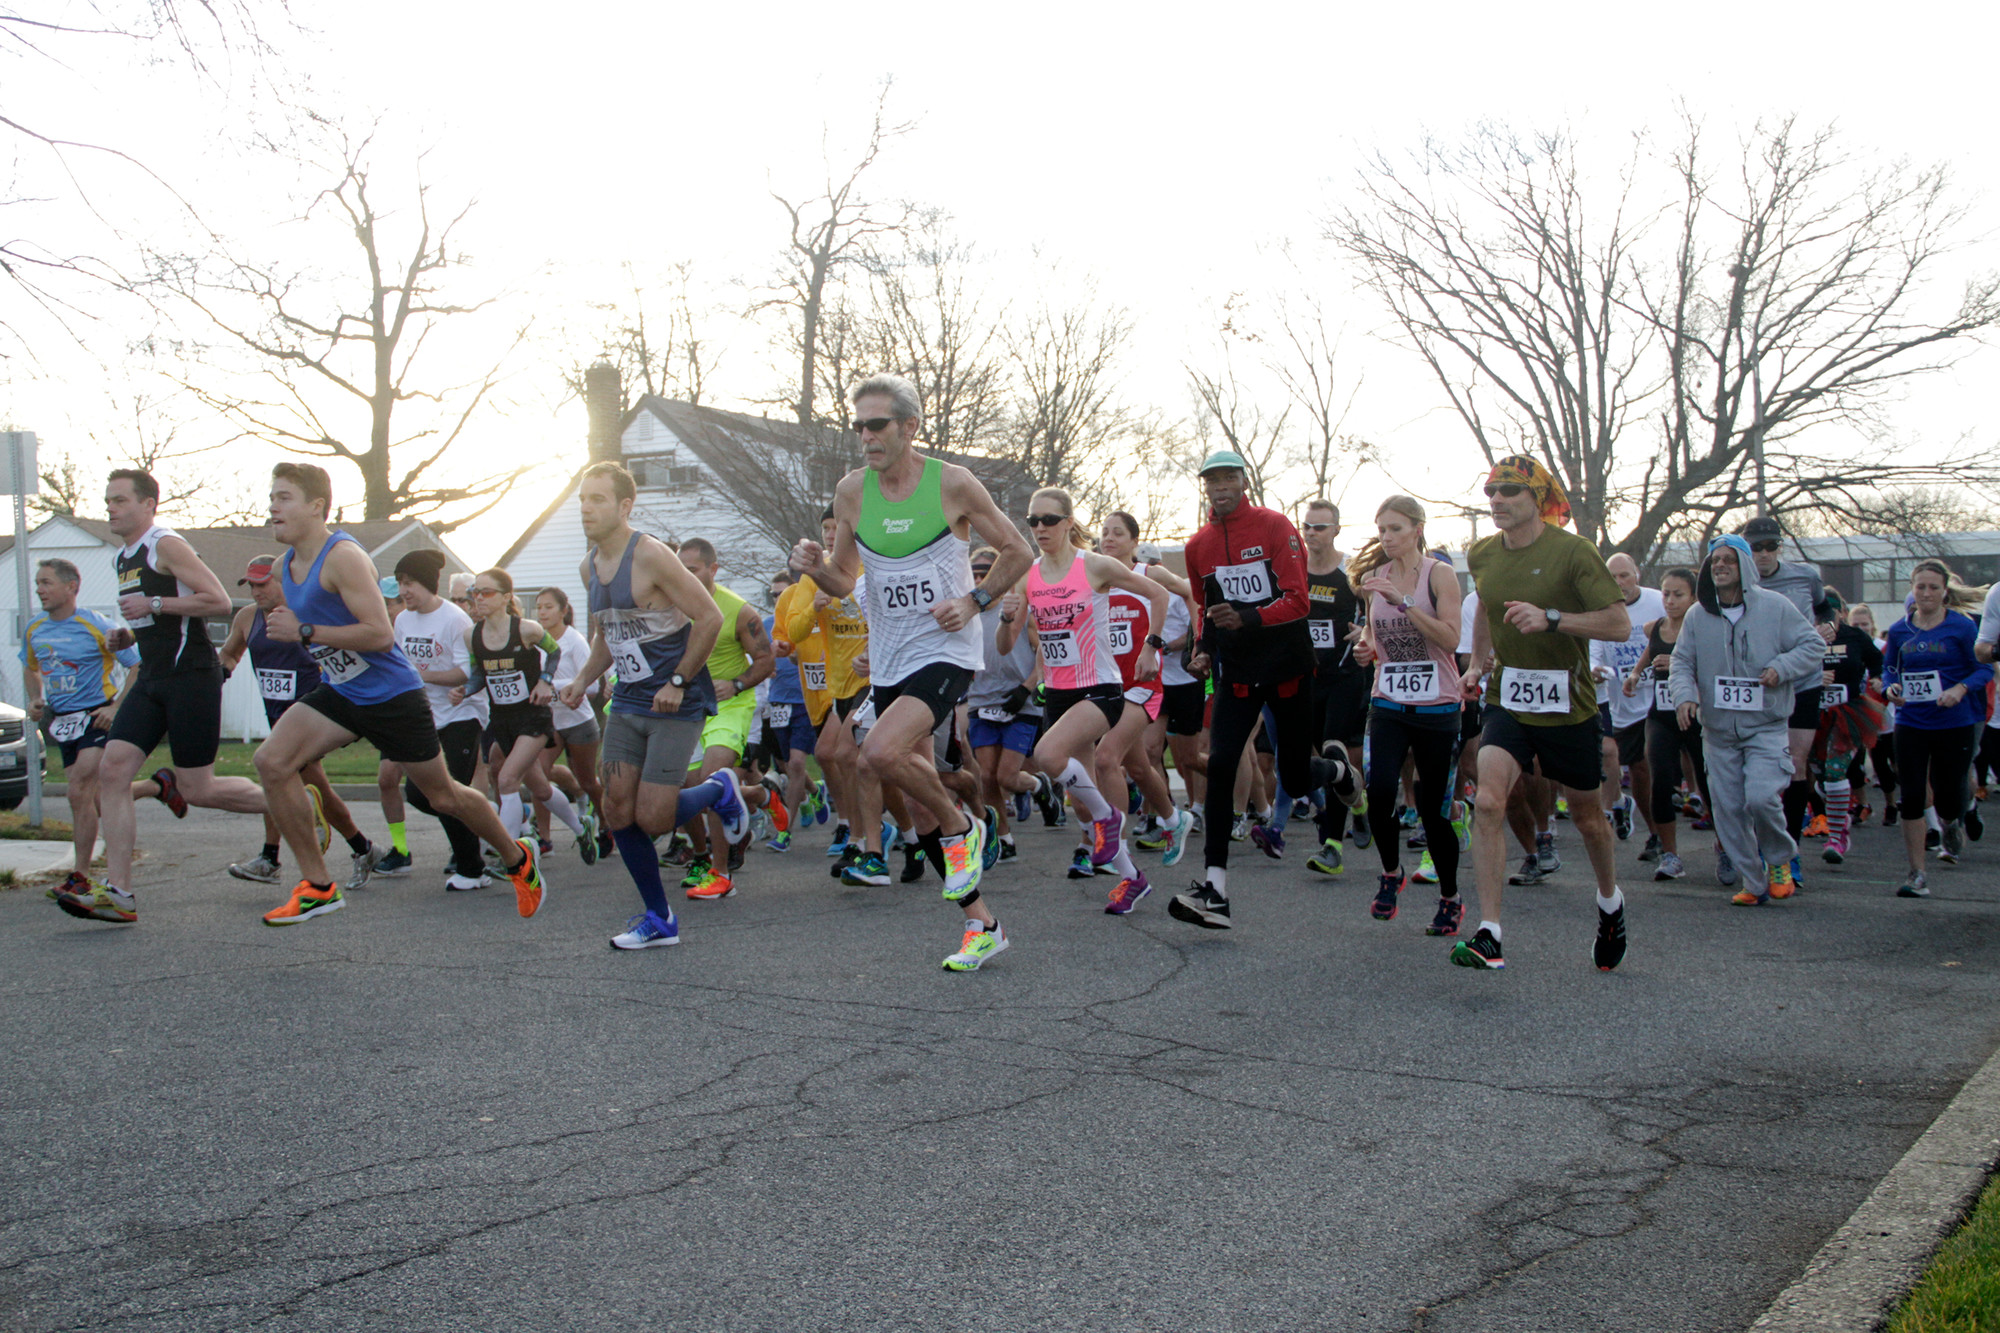 Runners head up daffodil avenue at the start of the Snowball Run, hosted by the Wantagh Chamber of Commerce, last Saturday morning.